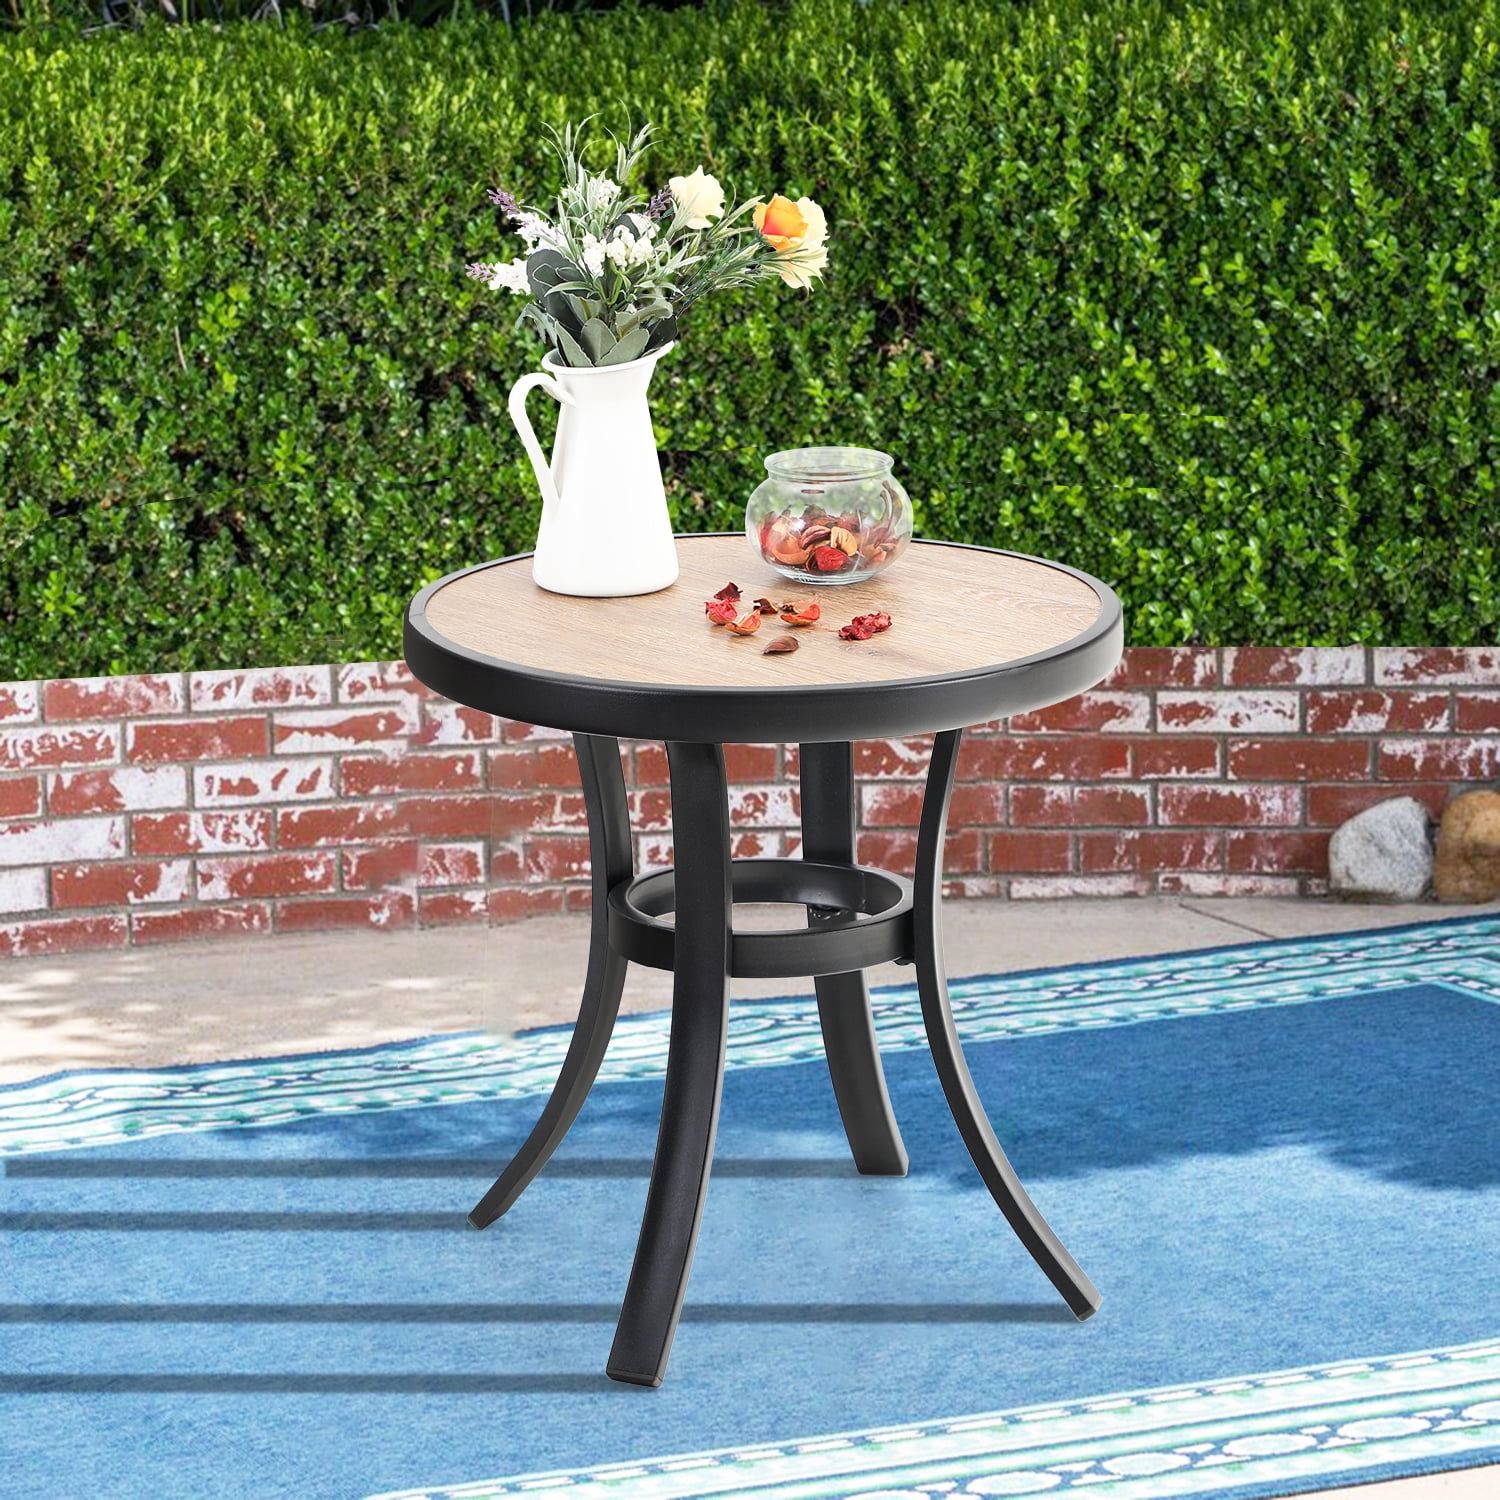 Mf Studio 19 Inches Bistro Side Table, Outdoor Coffee Table Wooden Like With Regard To Round Steel Patio Coffee Tables (View 18 of 20)